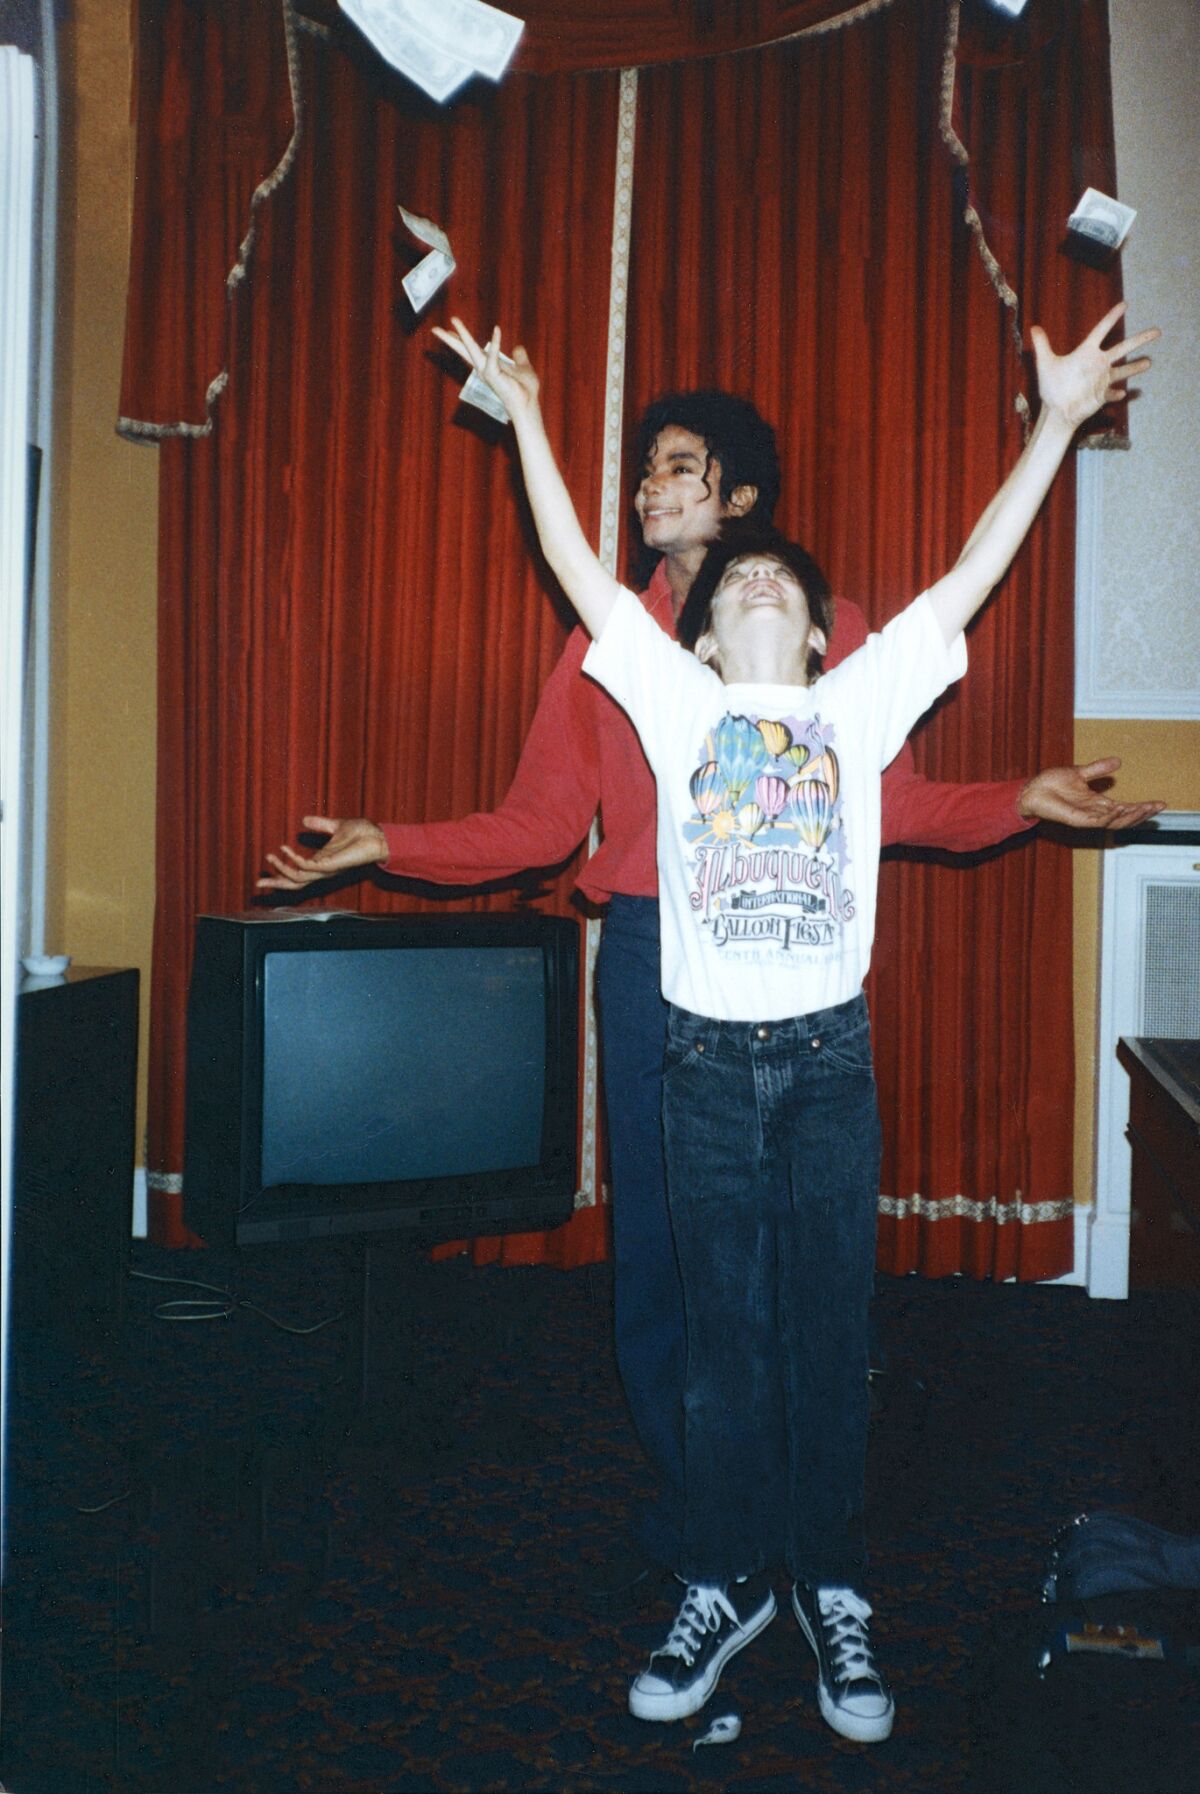 Michael Jackson with James Safechuck in "Leaving Neverland"